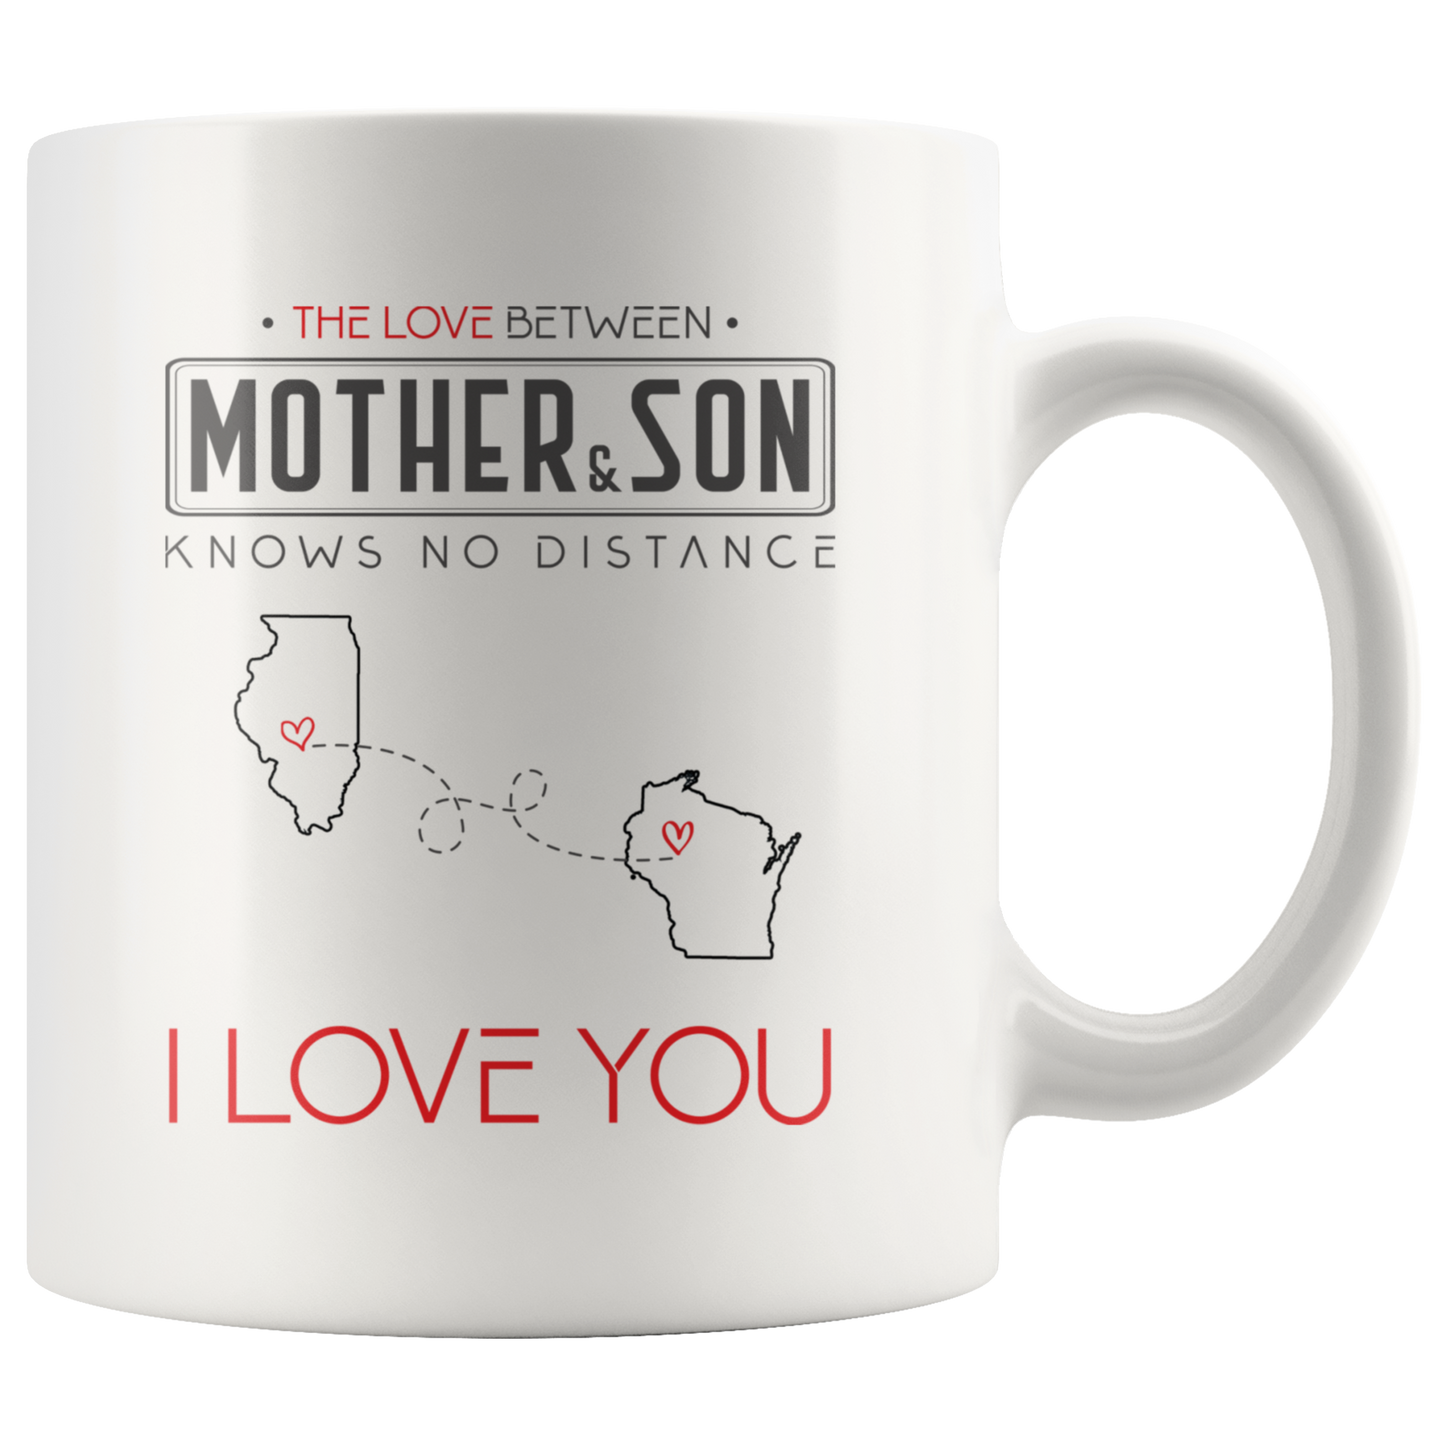 ND-21315357-sp-23273 - Mom And Son Accent Mug 11 oz Red - The Love Between Mother A